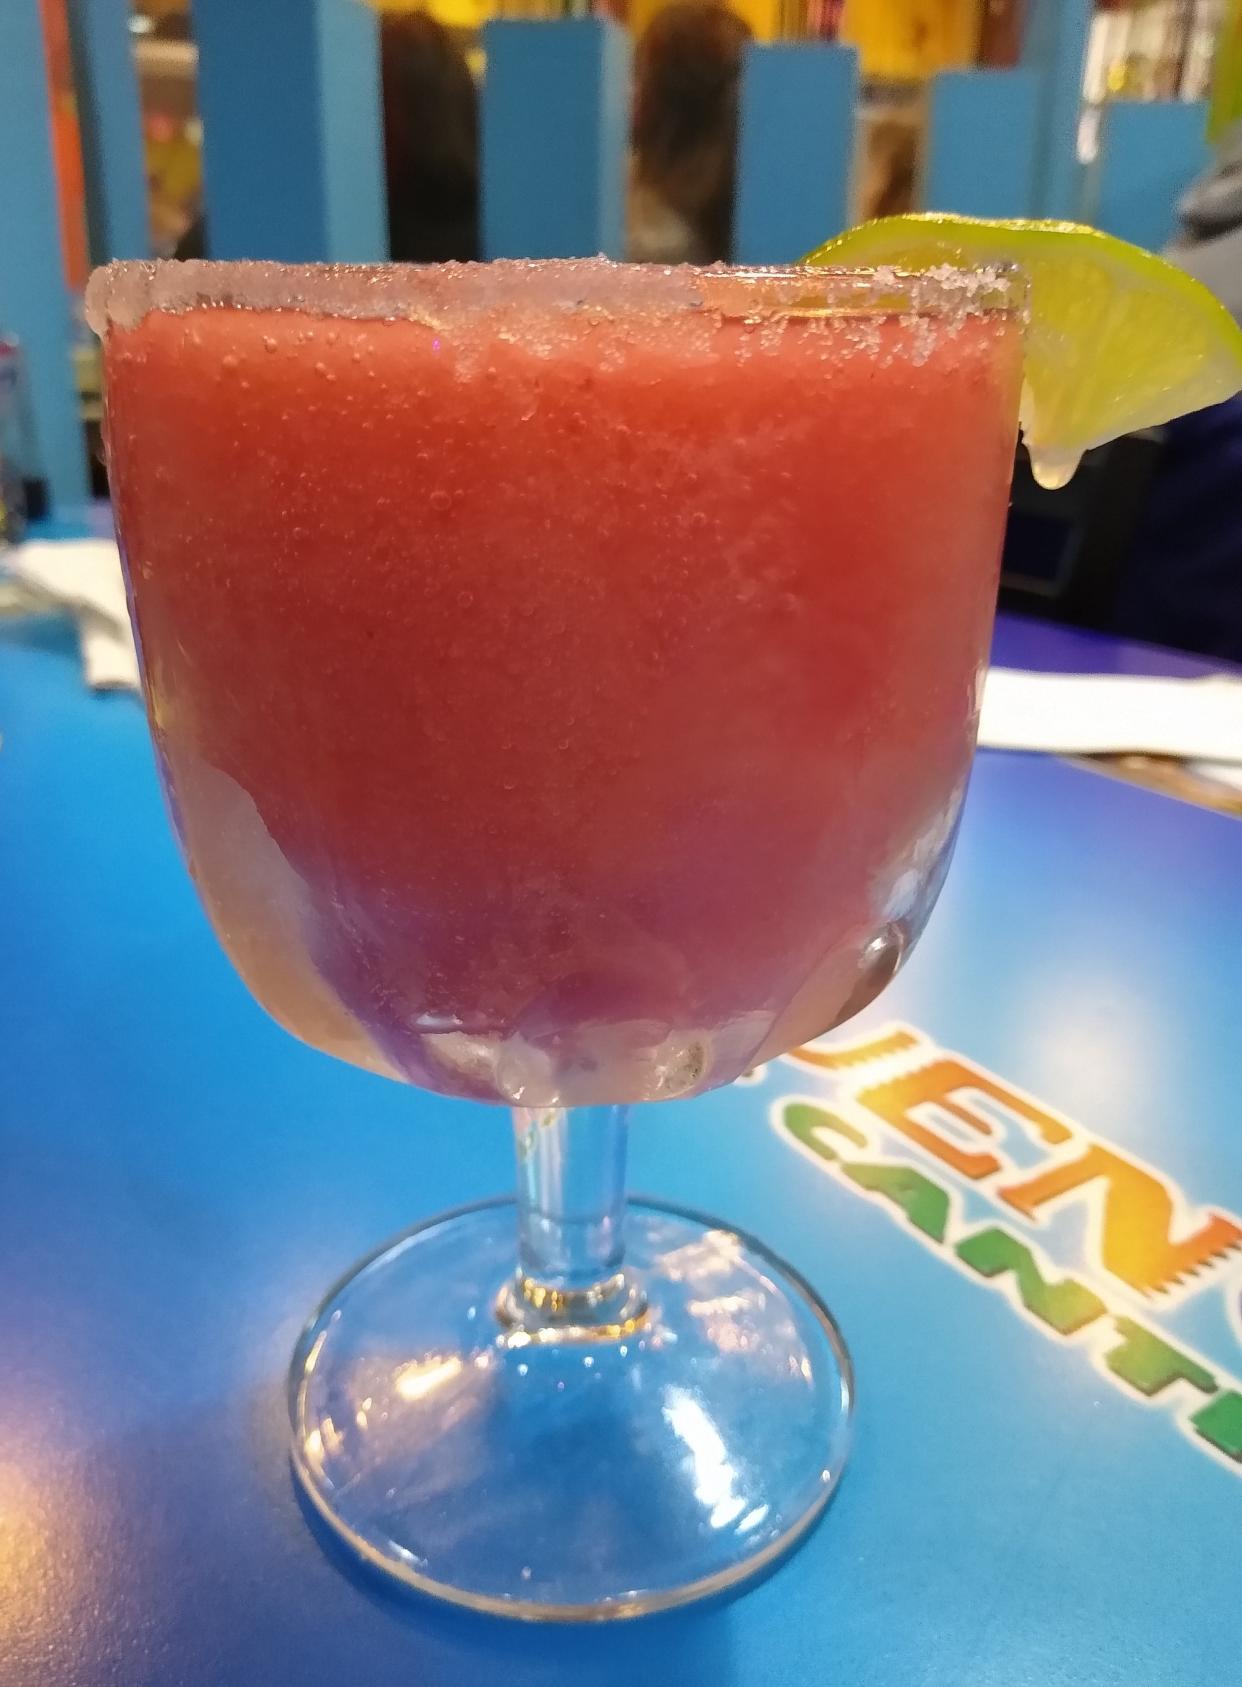 A small raspberry margarita is served at Mucho Bueno’s in Brunswick. Margarita Azul, strawberry, melon, lemon lime, mango and guava are other flavor options.